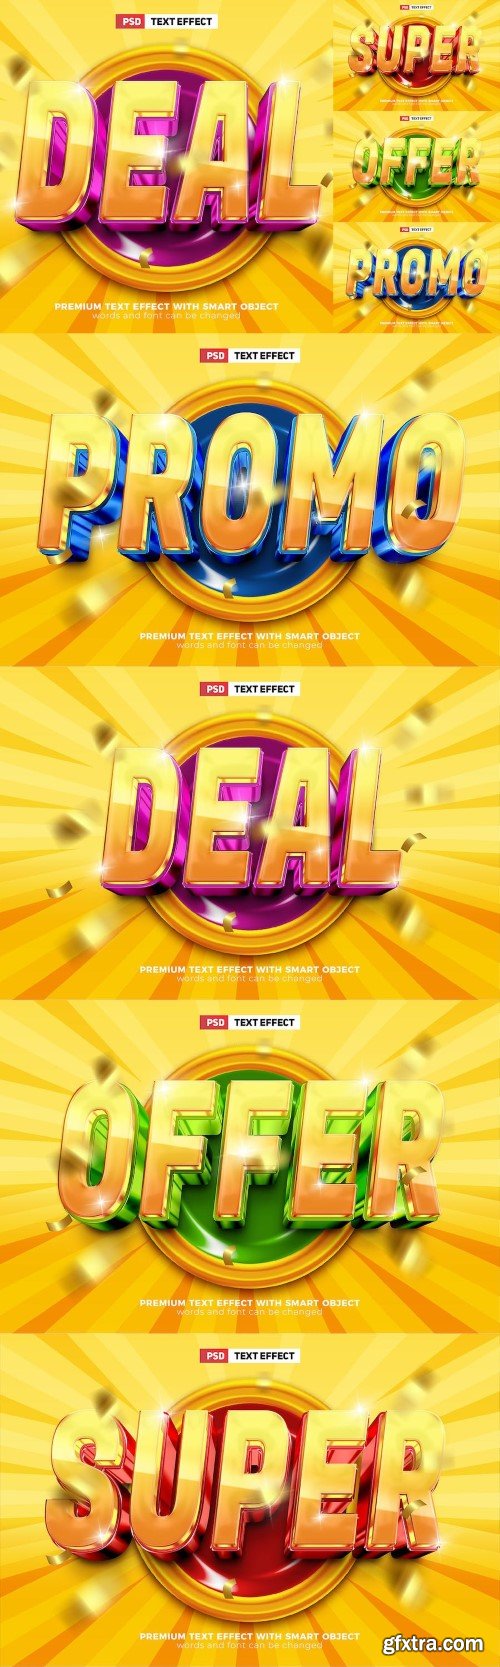 Super Sale Glossy 3D Text Effect Template